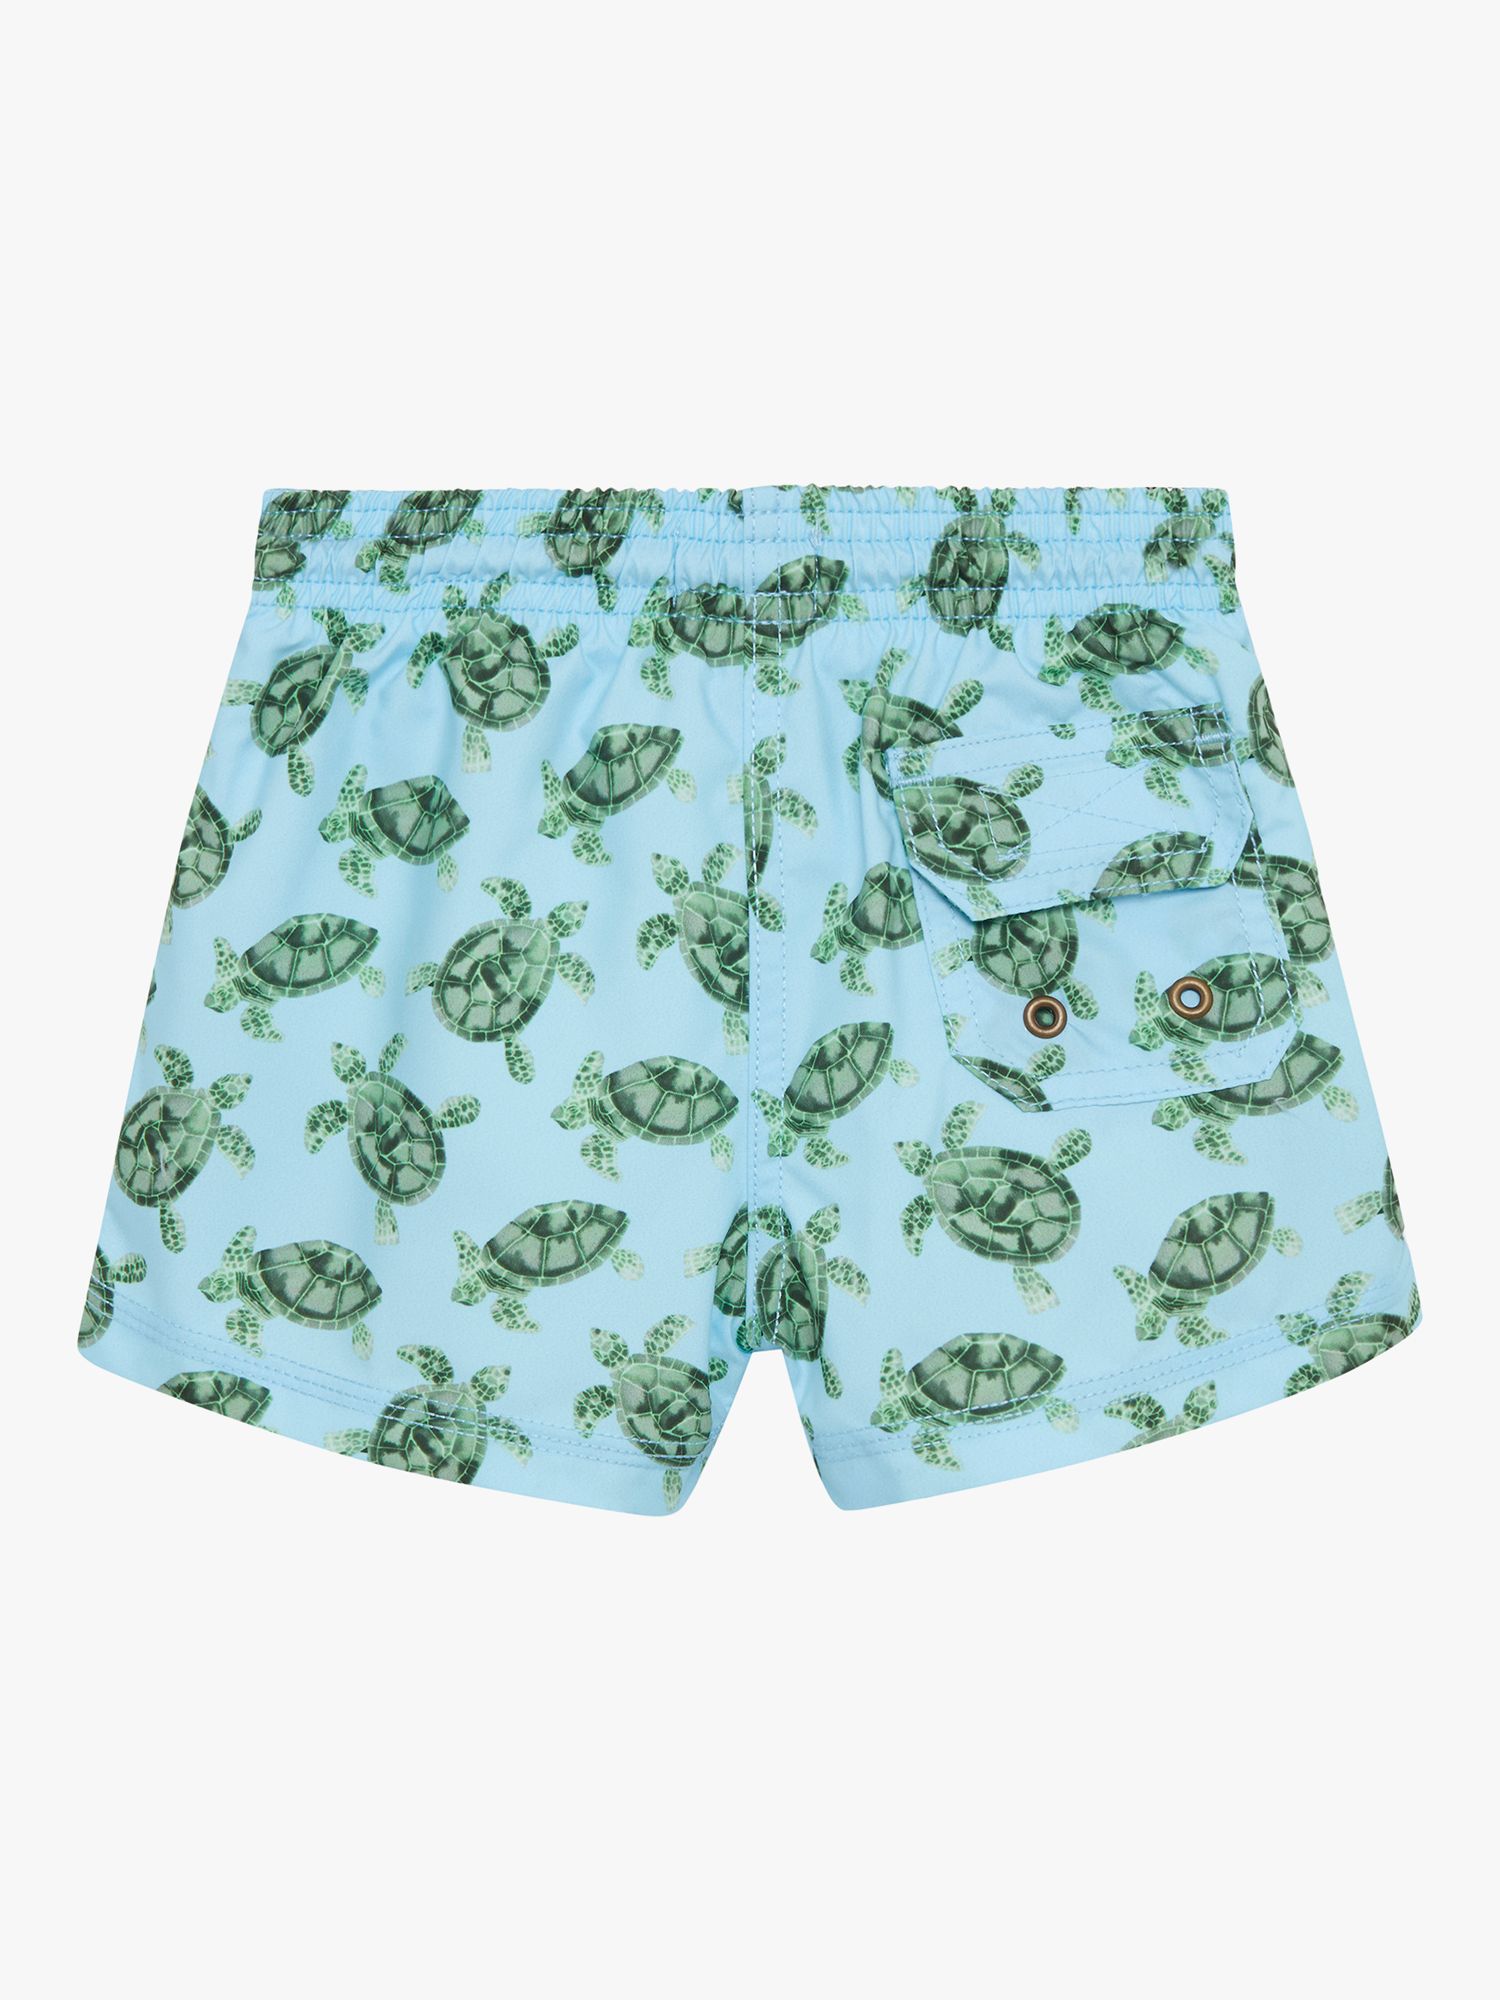 Buy Trotters Baby Turtle Swim Shorts, Blue Online at johnlewis.com